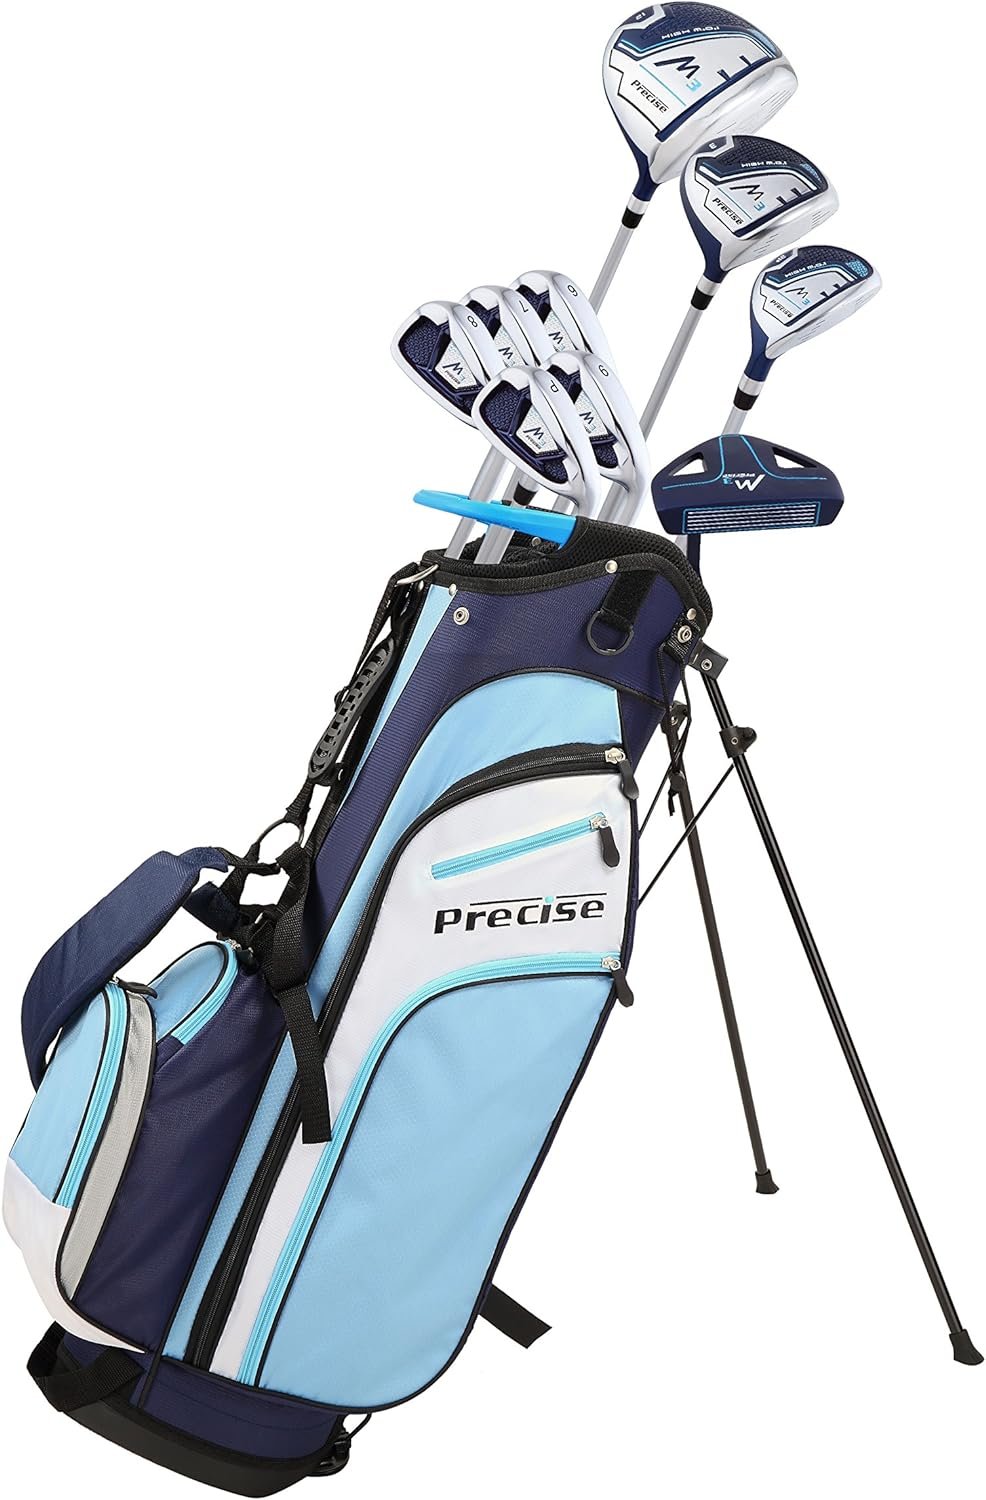 Precise M3 Ladies Womens Complete Golf Clubs Set Includes Driver, Fairway, Hybrid, 7-PW Irons, Putter, Stand Bag, 3 H/Cs Blue - Regular or Petite Size!